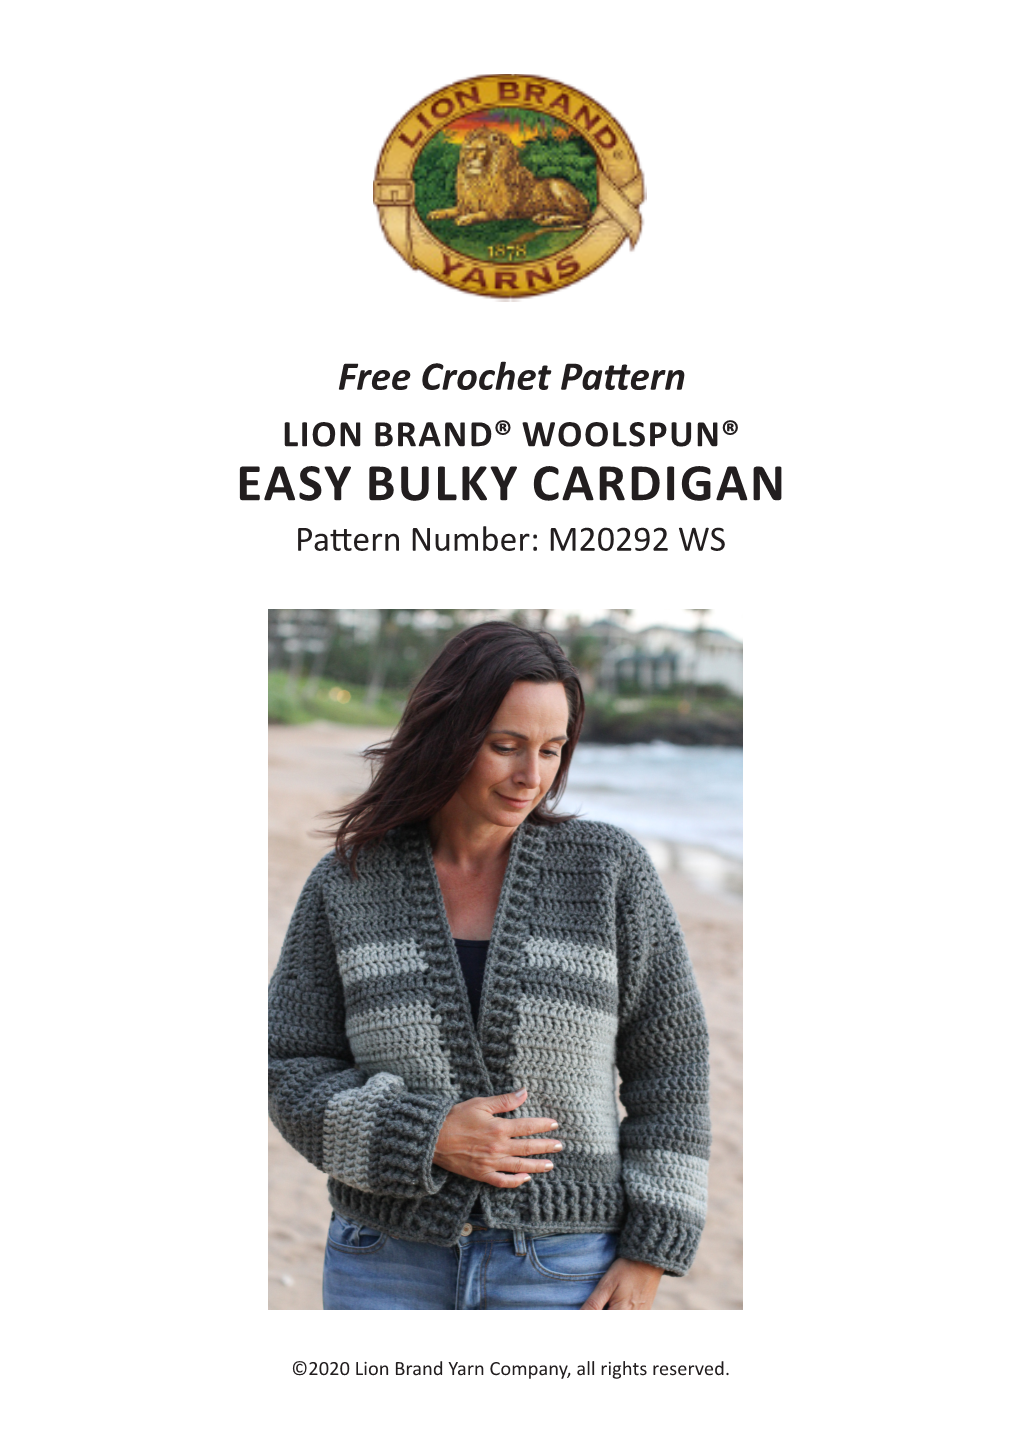 LION BRAND® WOOLSPUN® EASY BULKY CARDIGAN Pattern Number: M20292 WS